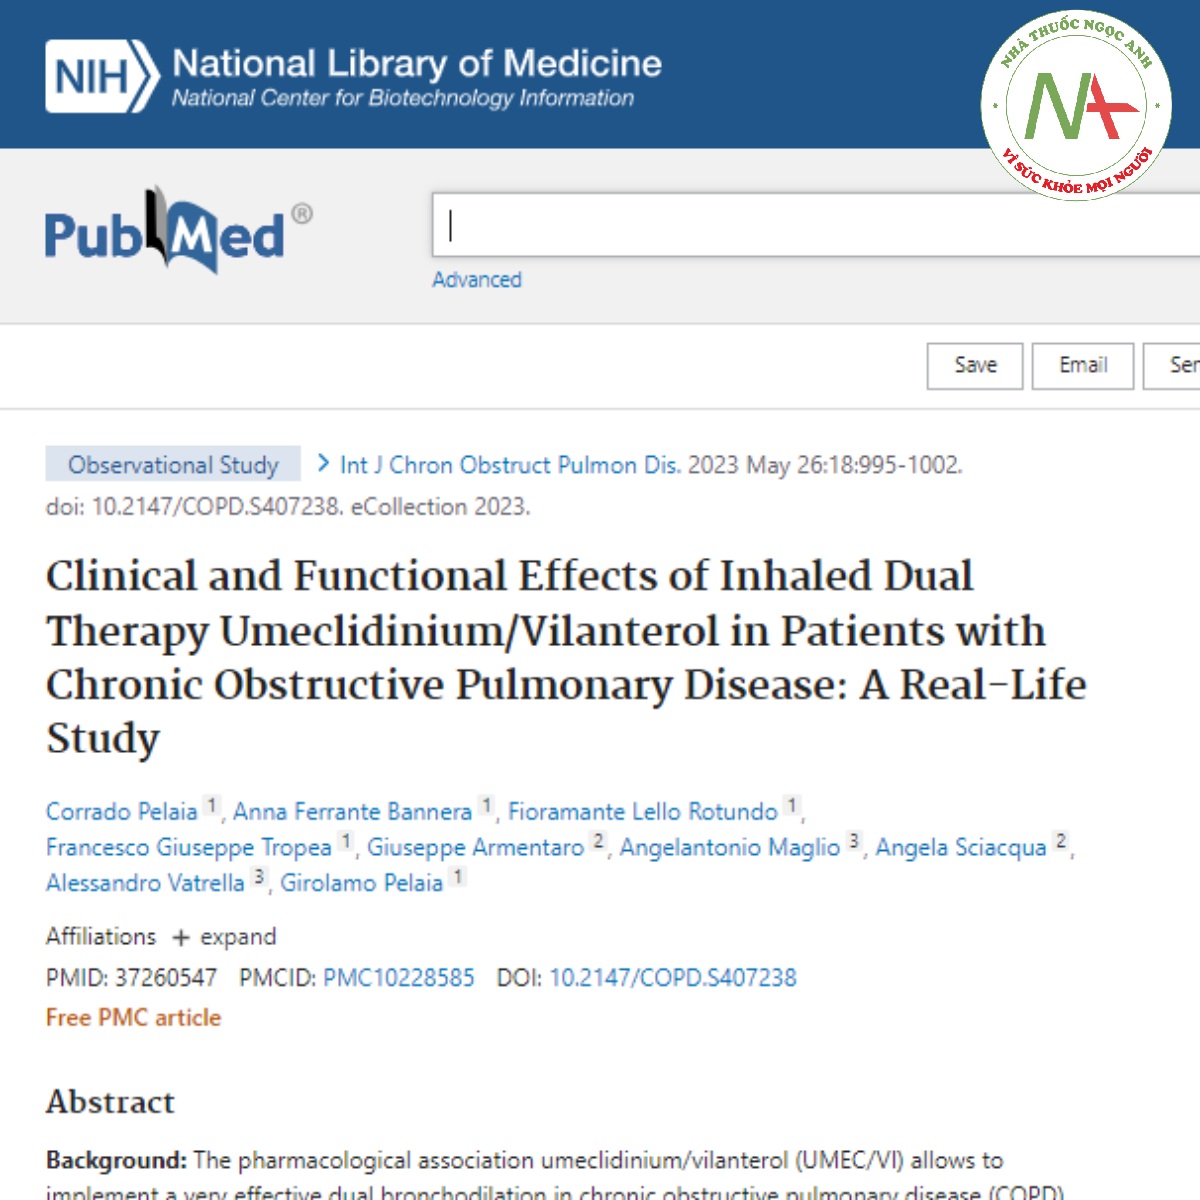 Clinical and Functional Effects of Inhaled Dual Therapy Umeclidinium_Vilanterol in Patients with Chronic Obstructive Pulmonary Disease_ A Real-Life Study